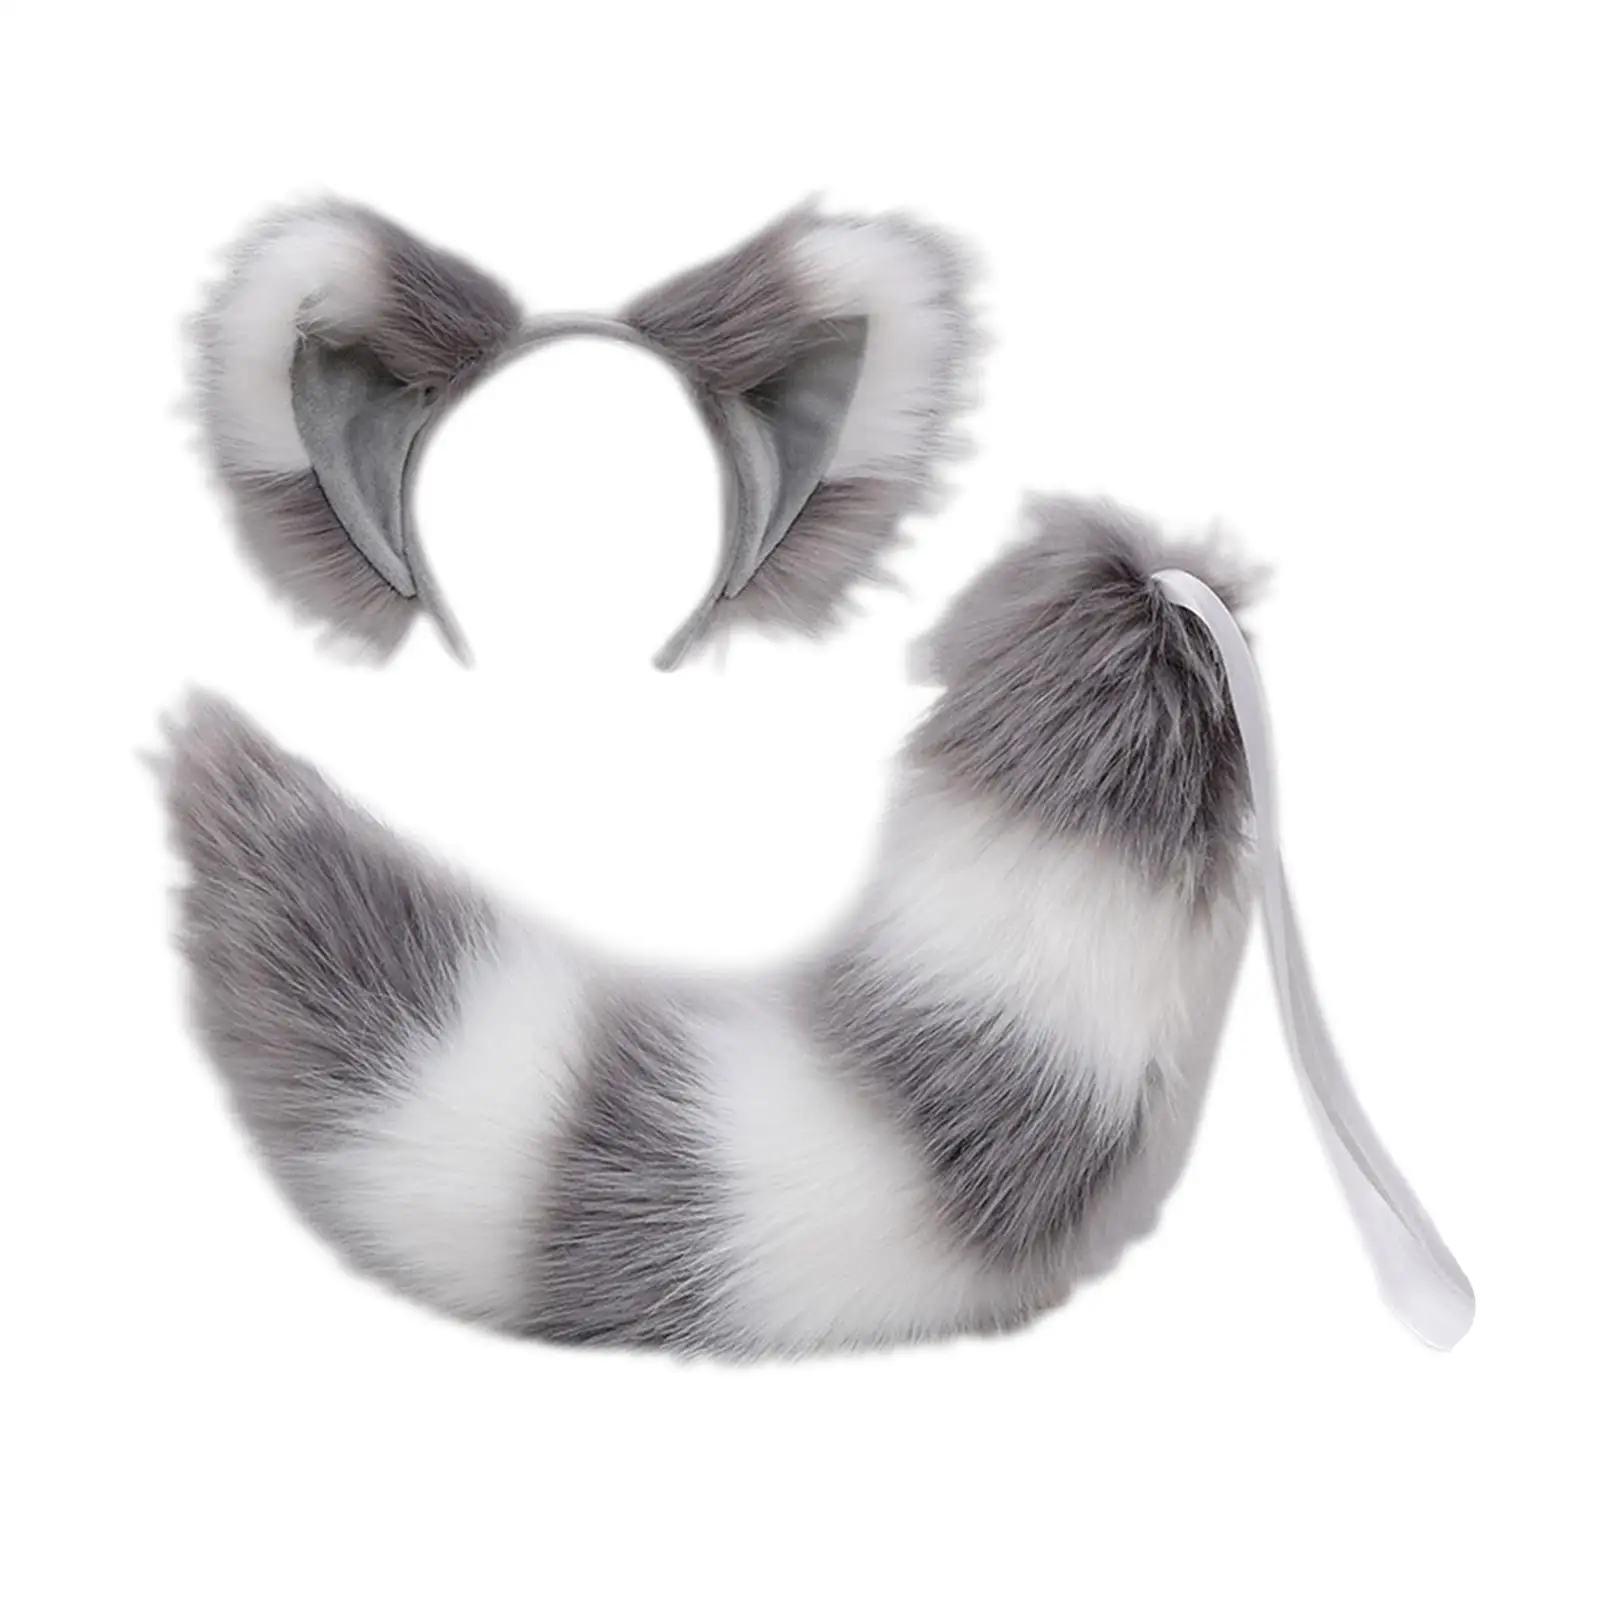 Cats Ears Large Tail Cosplay Animal Headpiece Dress up Furry Costume Toys Decor Headwear for Gifts Adults Halloween Performance